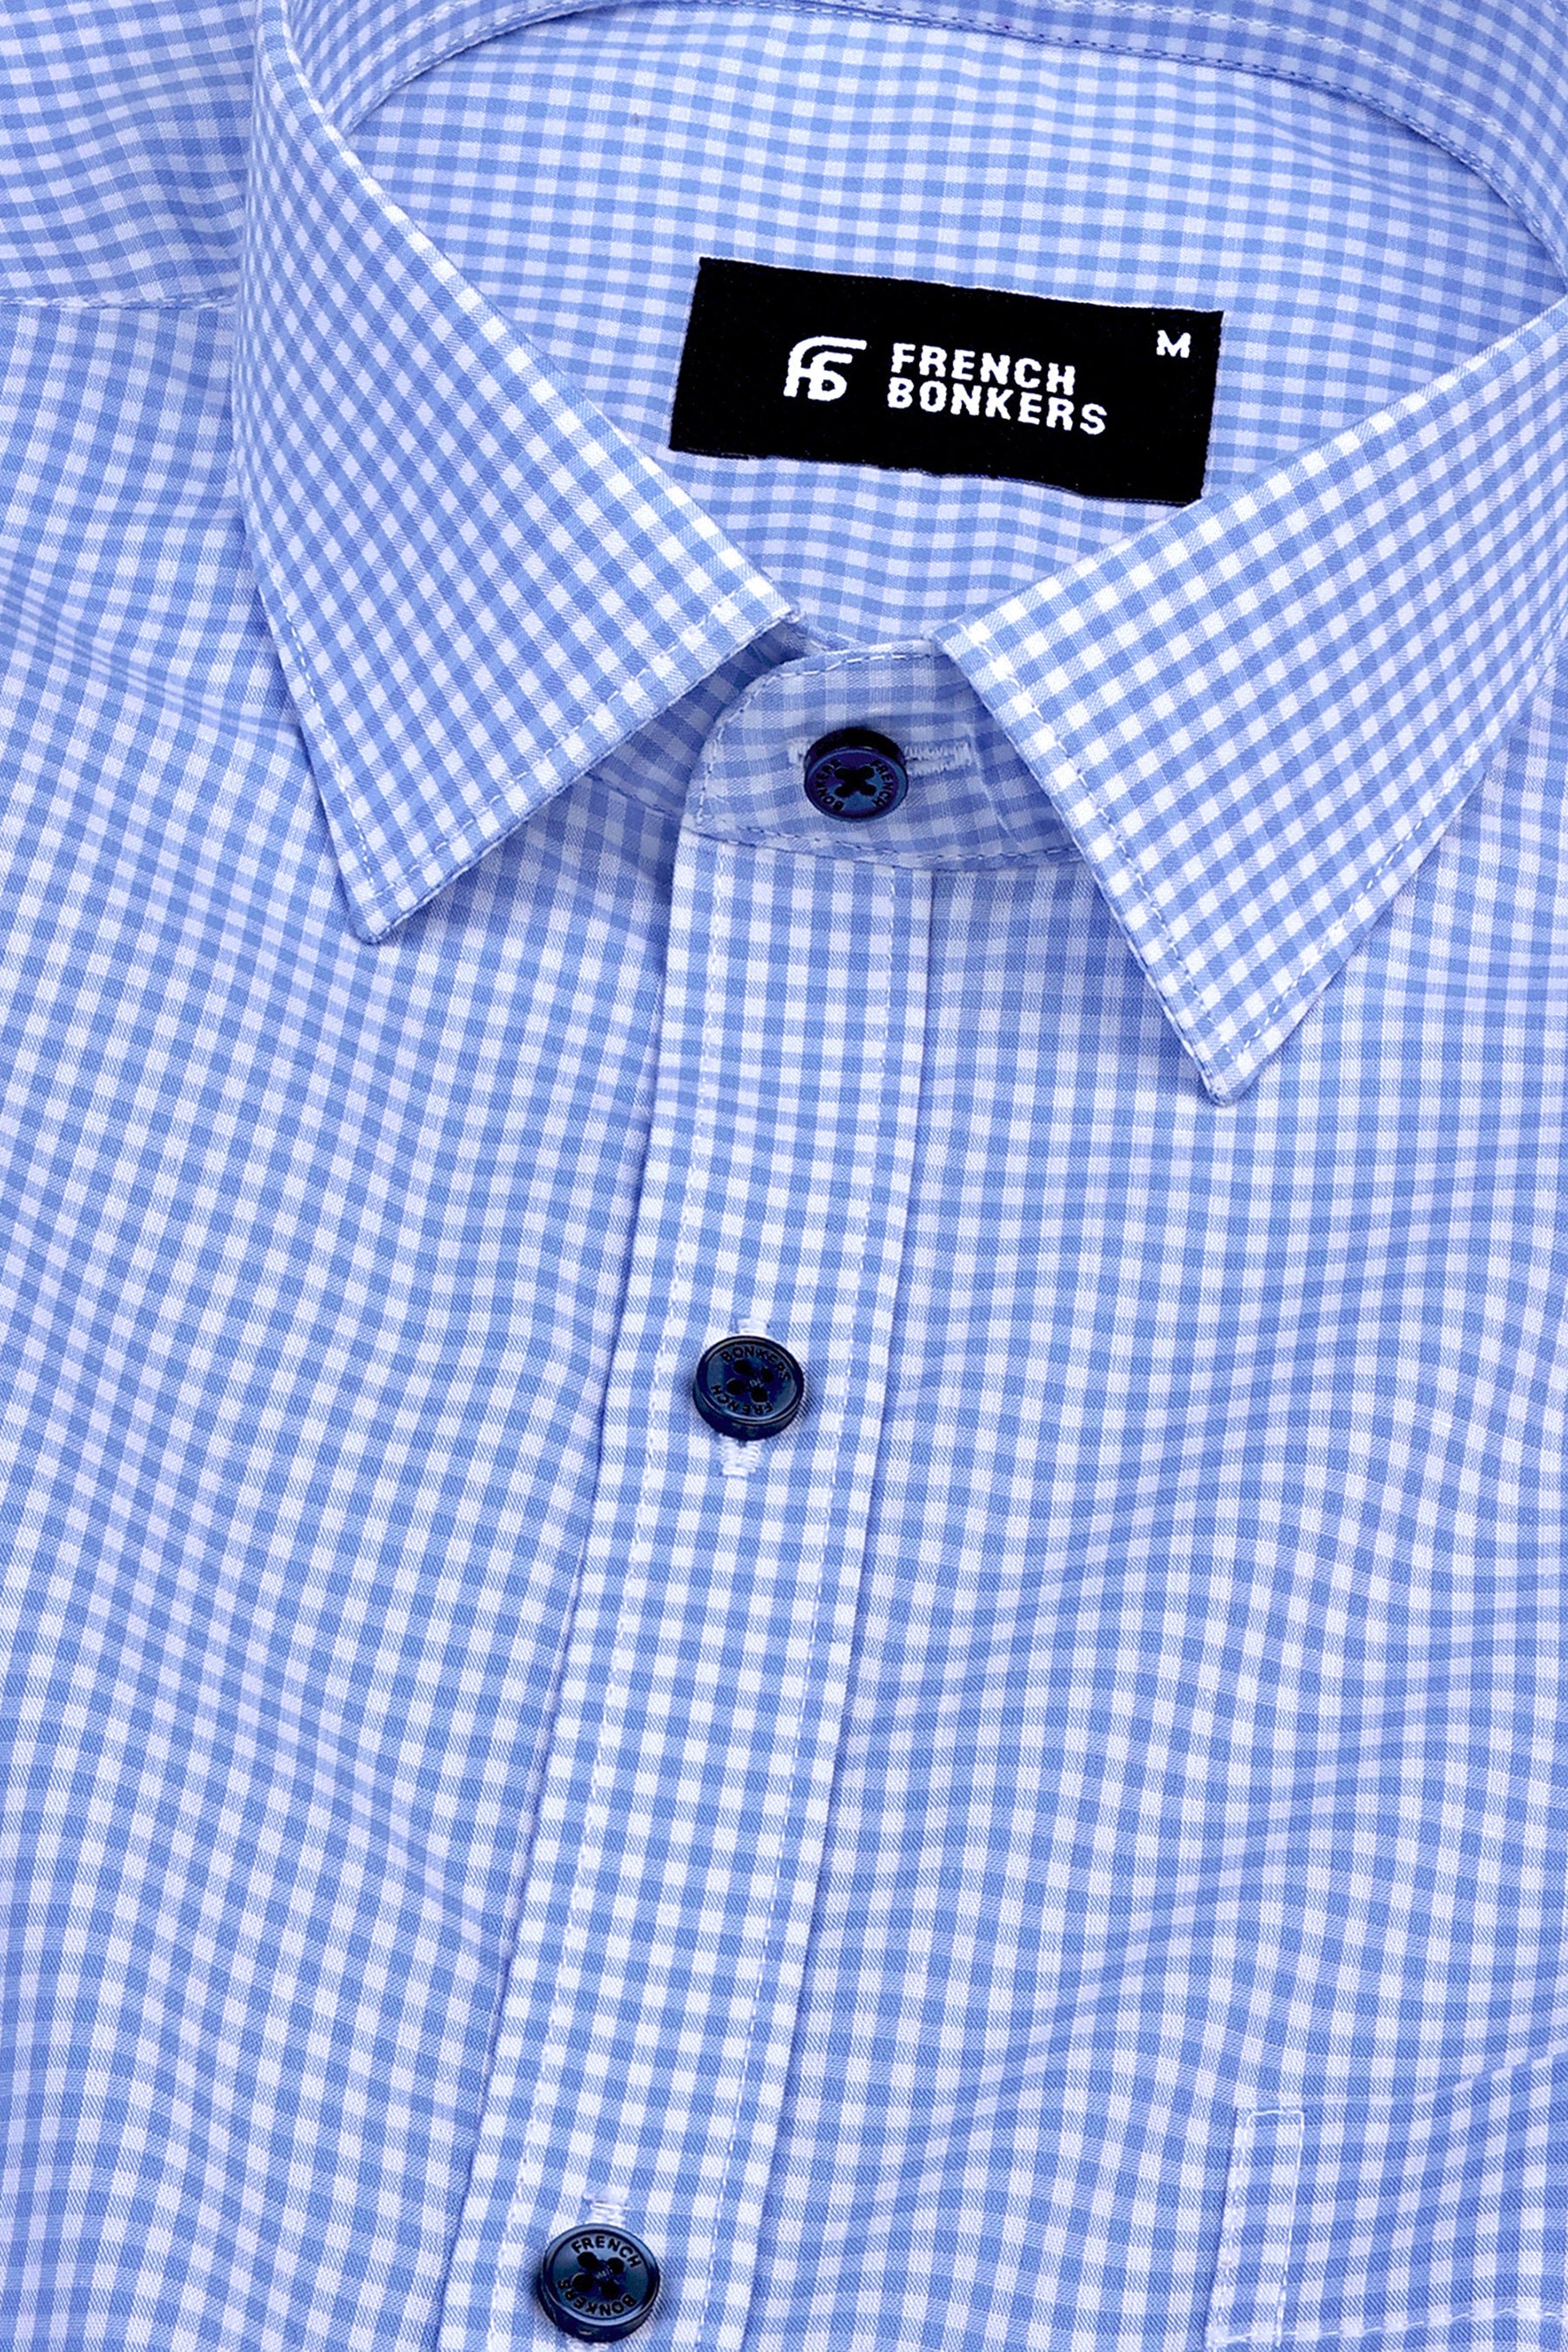 Light sky blue with white pin check  cotton shirt